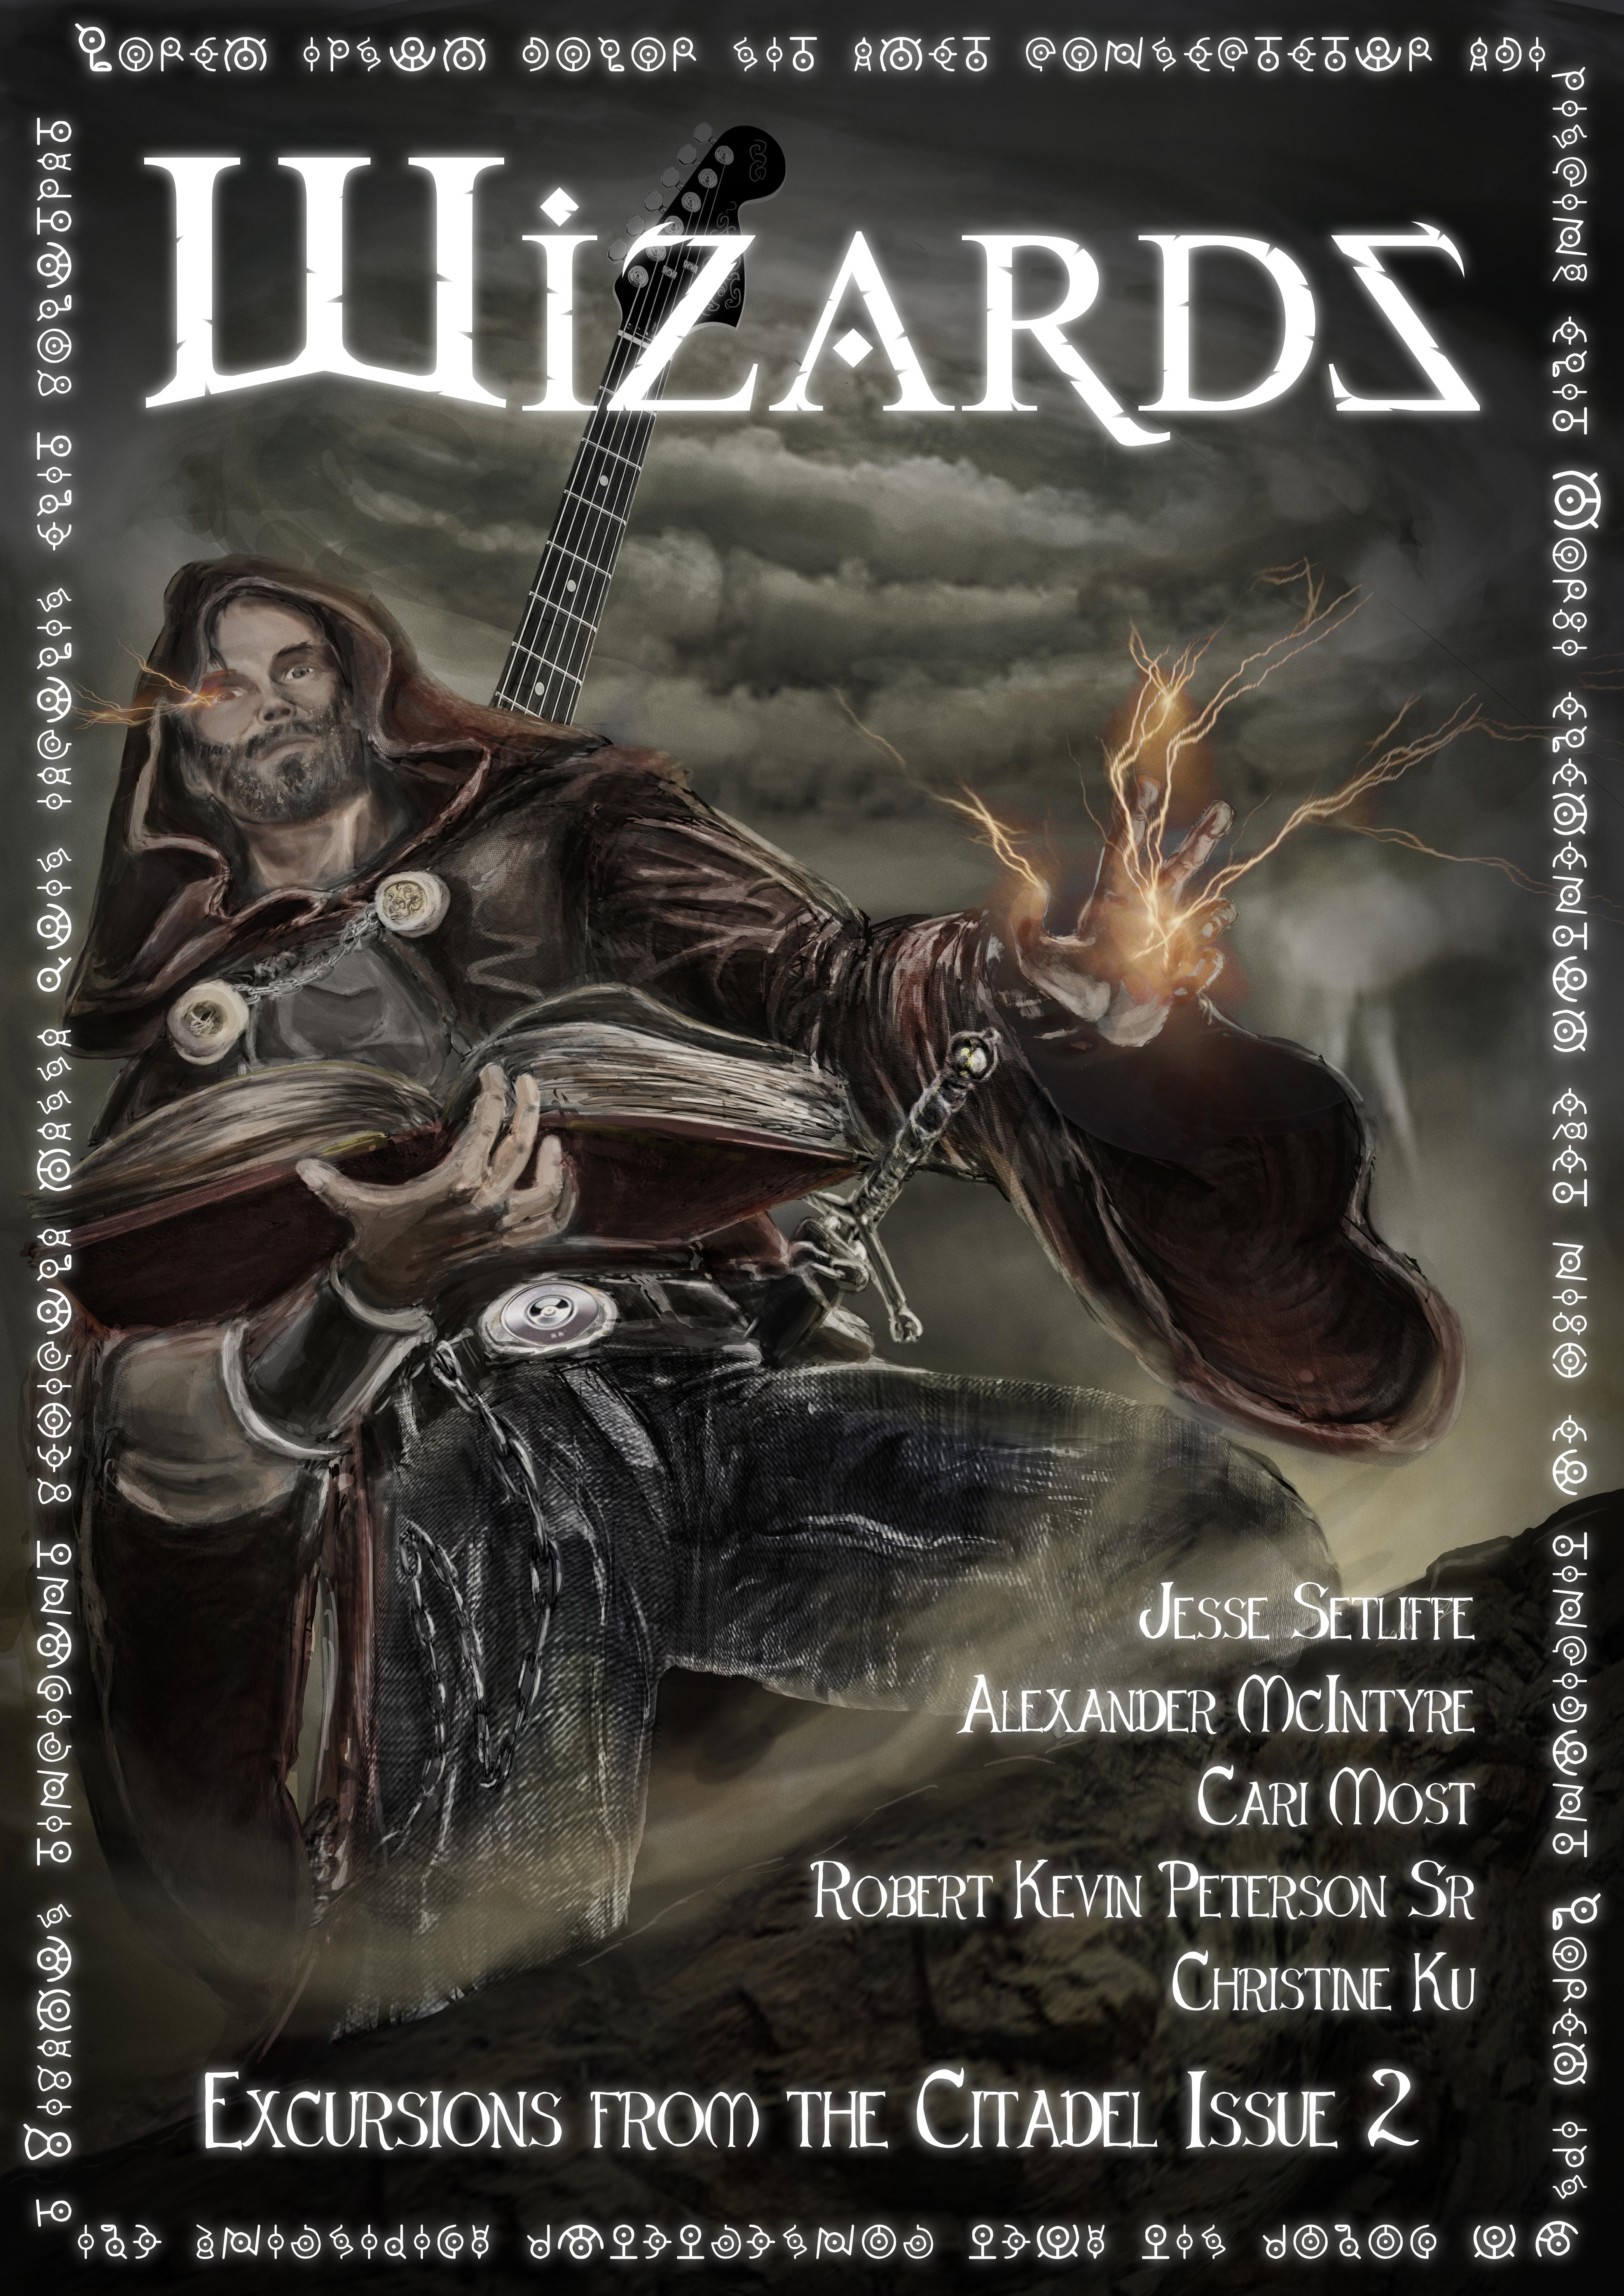 Excursions from the Citadel Issue 2: Wizards